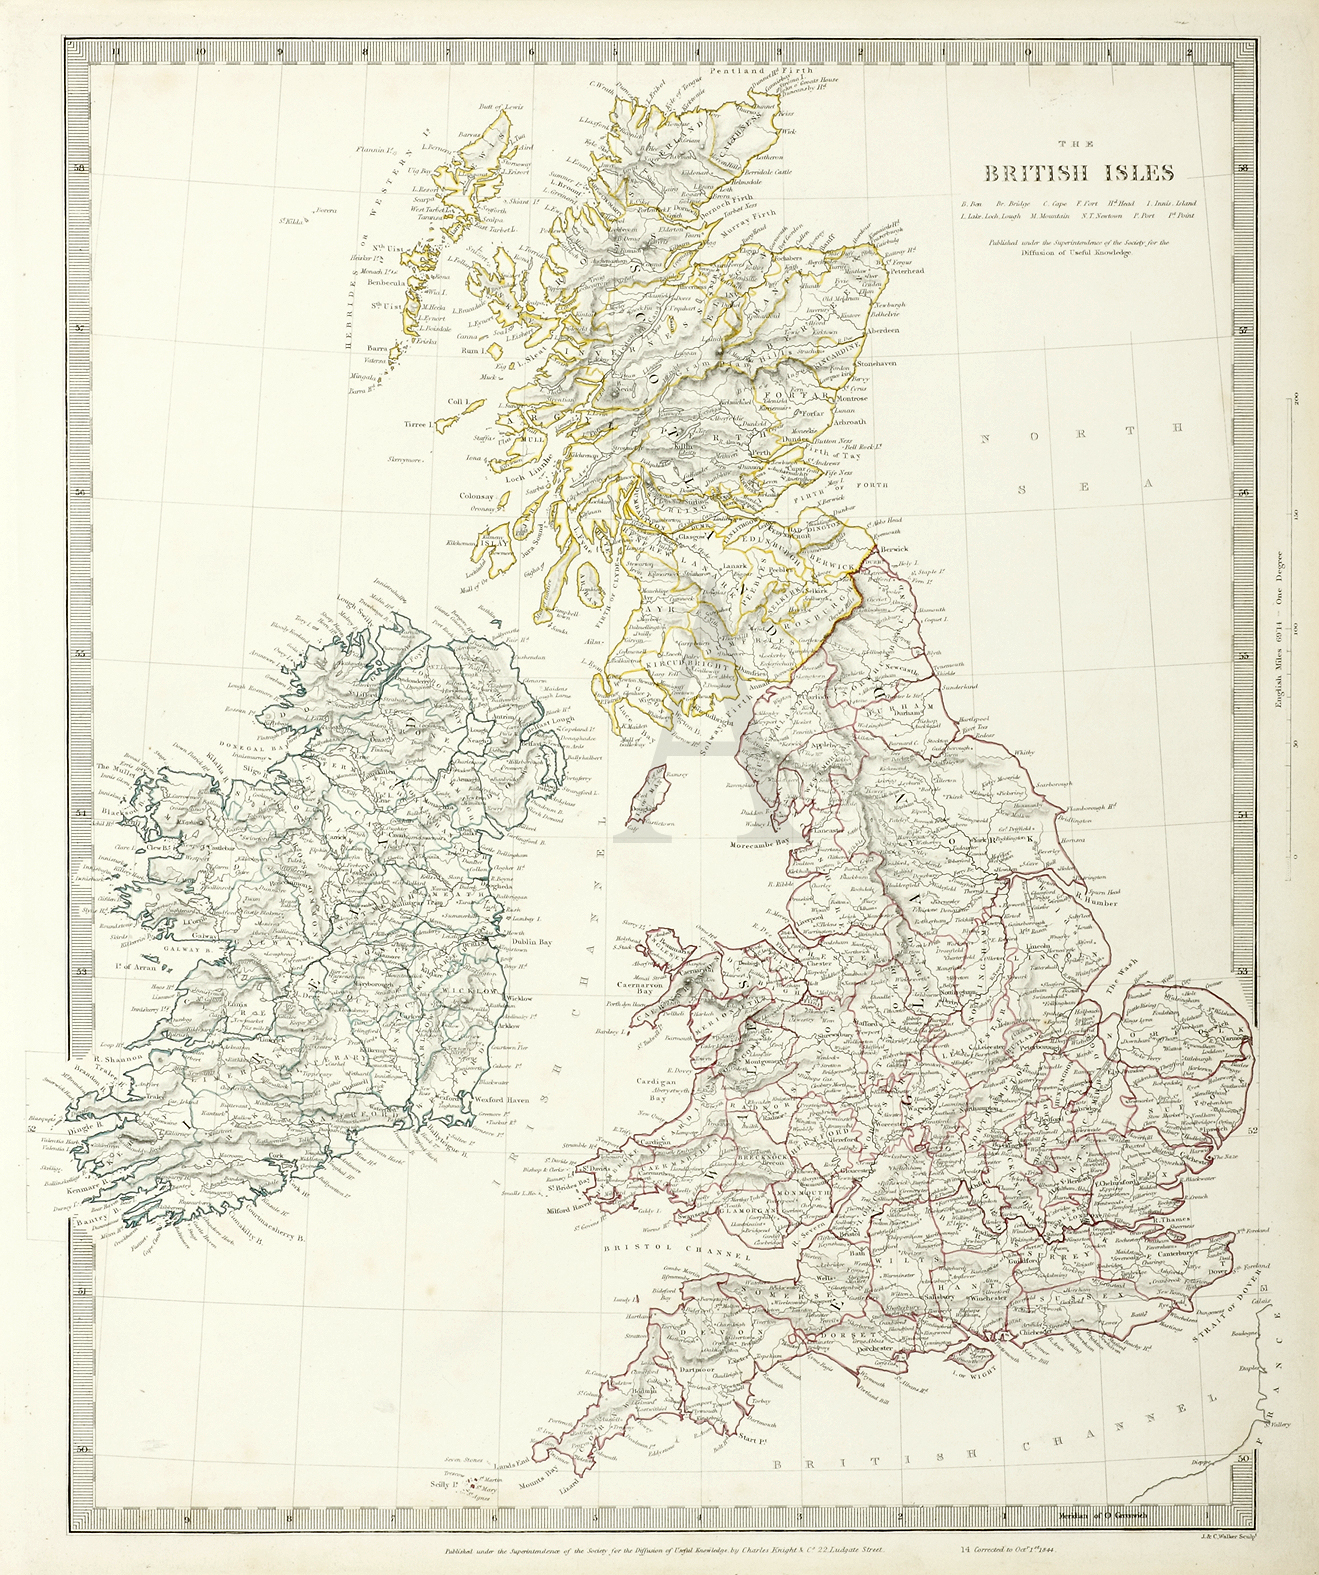 The British Isles - Antique Print from 1854